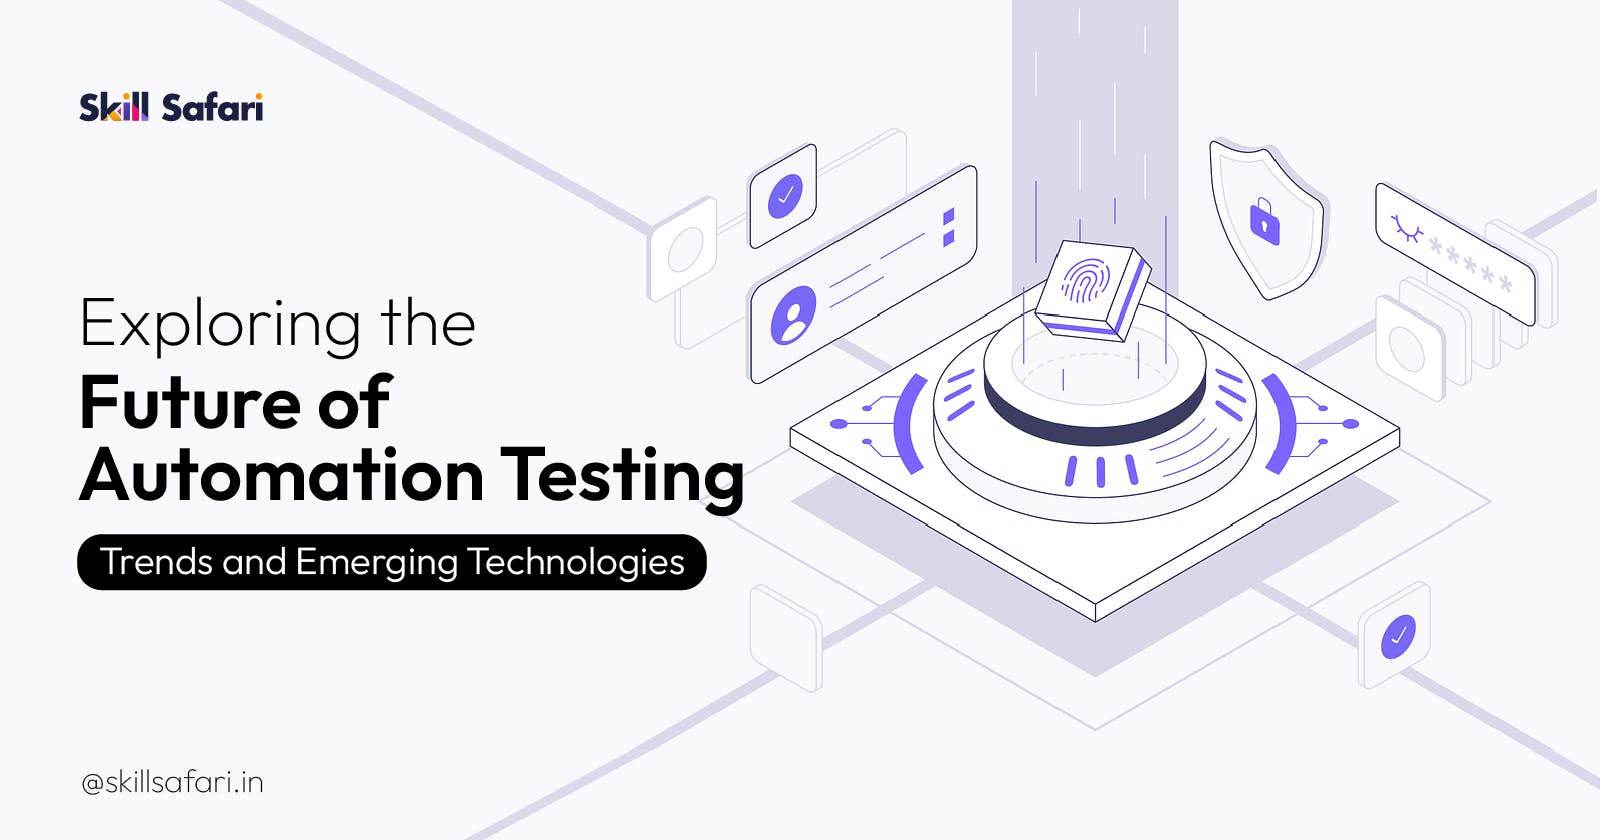 Exploring the Future of Automation Testing: Trends and Emerging Technologies